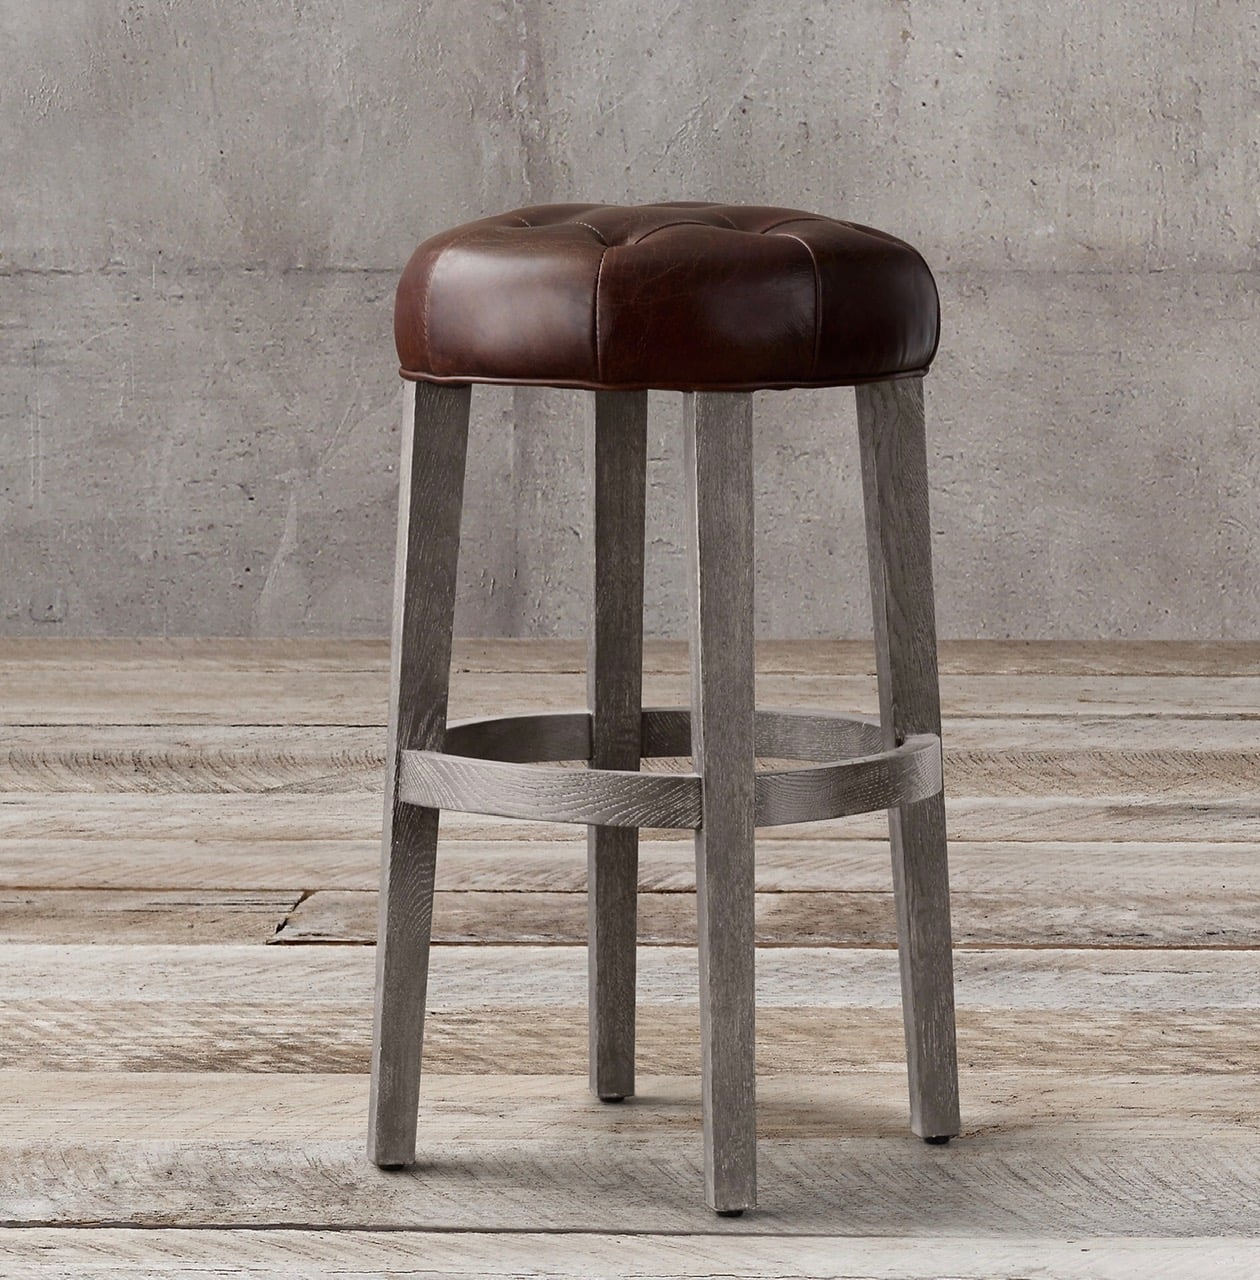 Made to Order Bar Stools Furniture. - BST 042-01